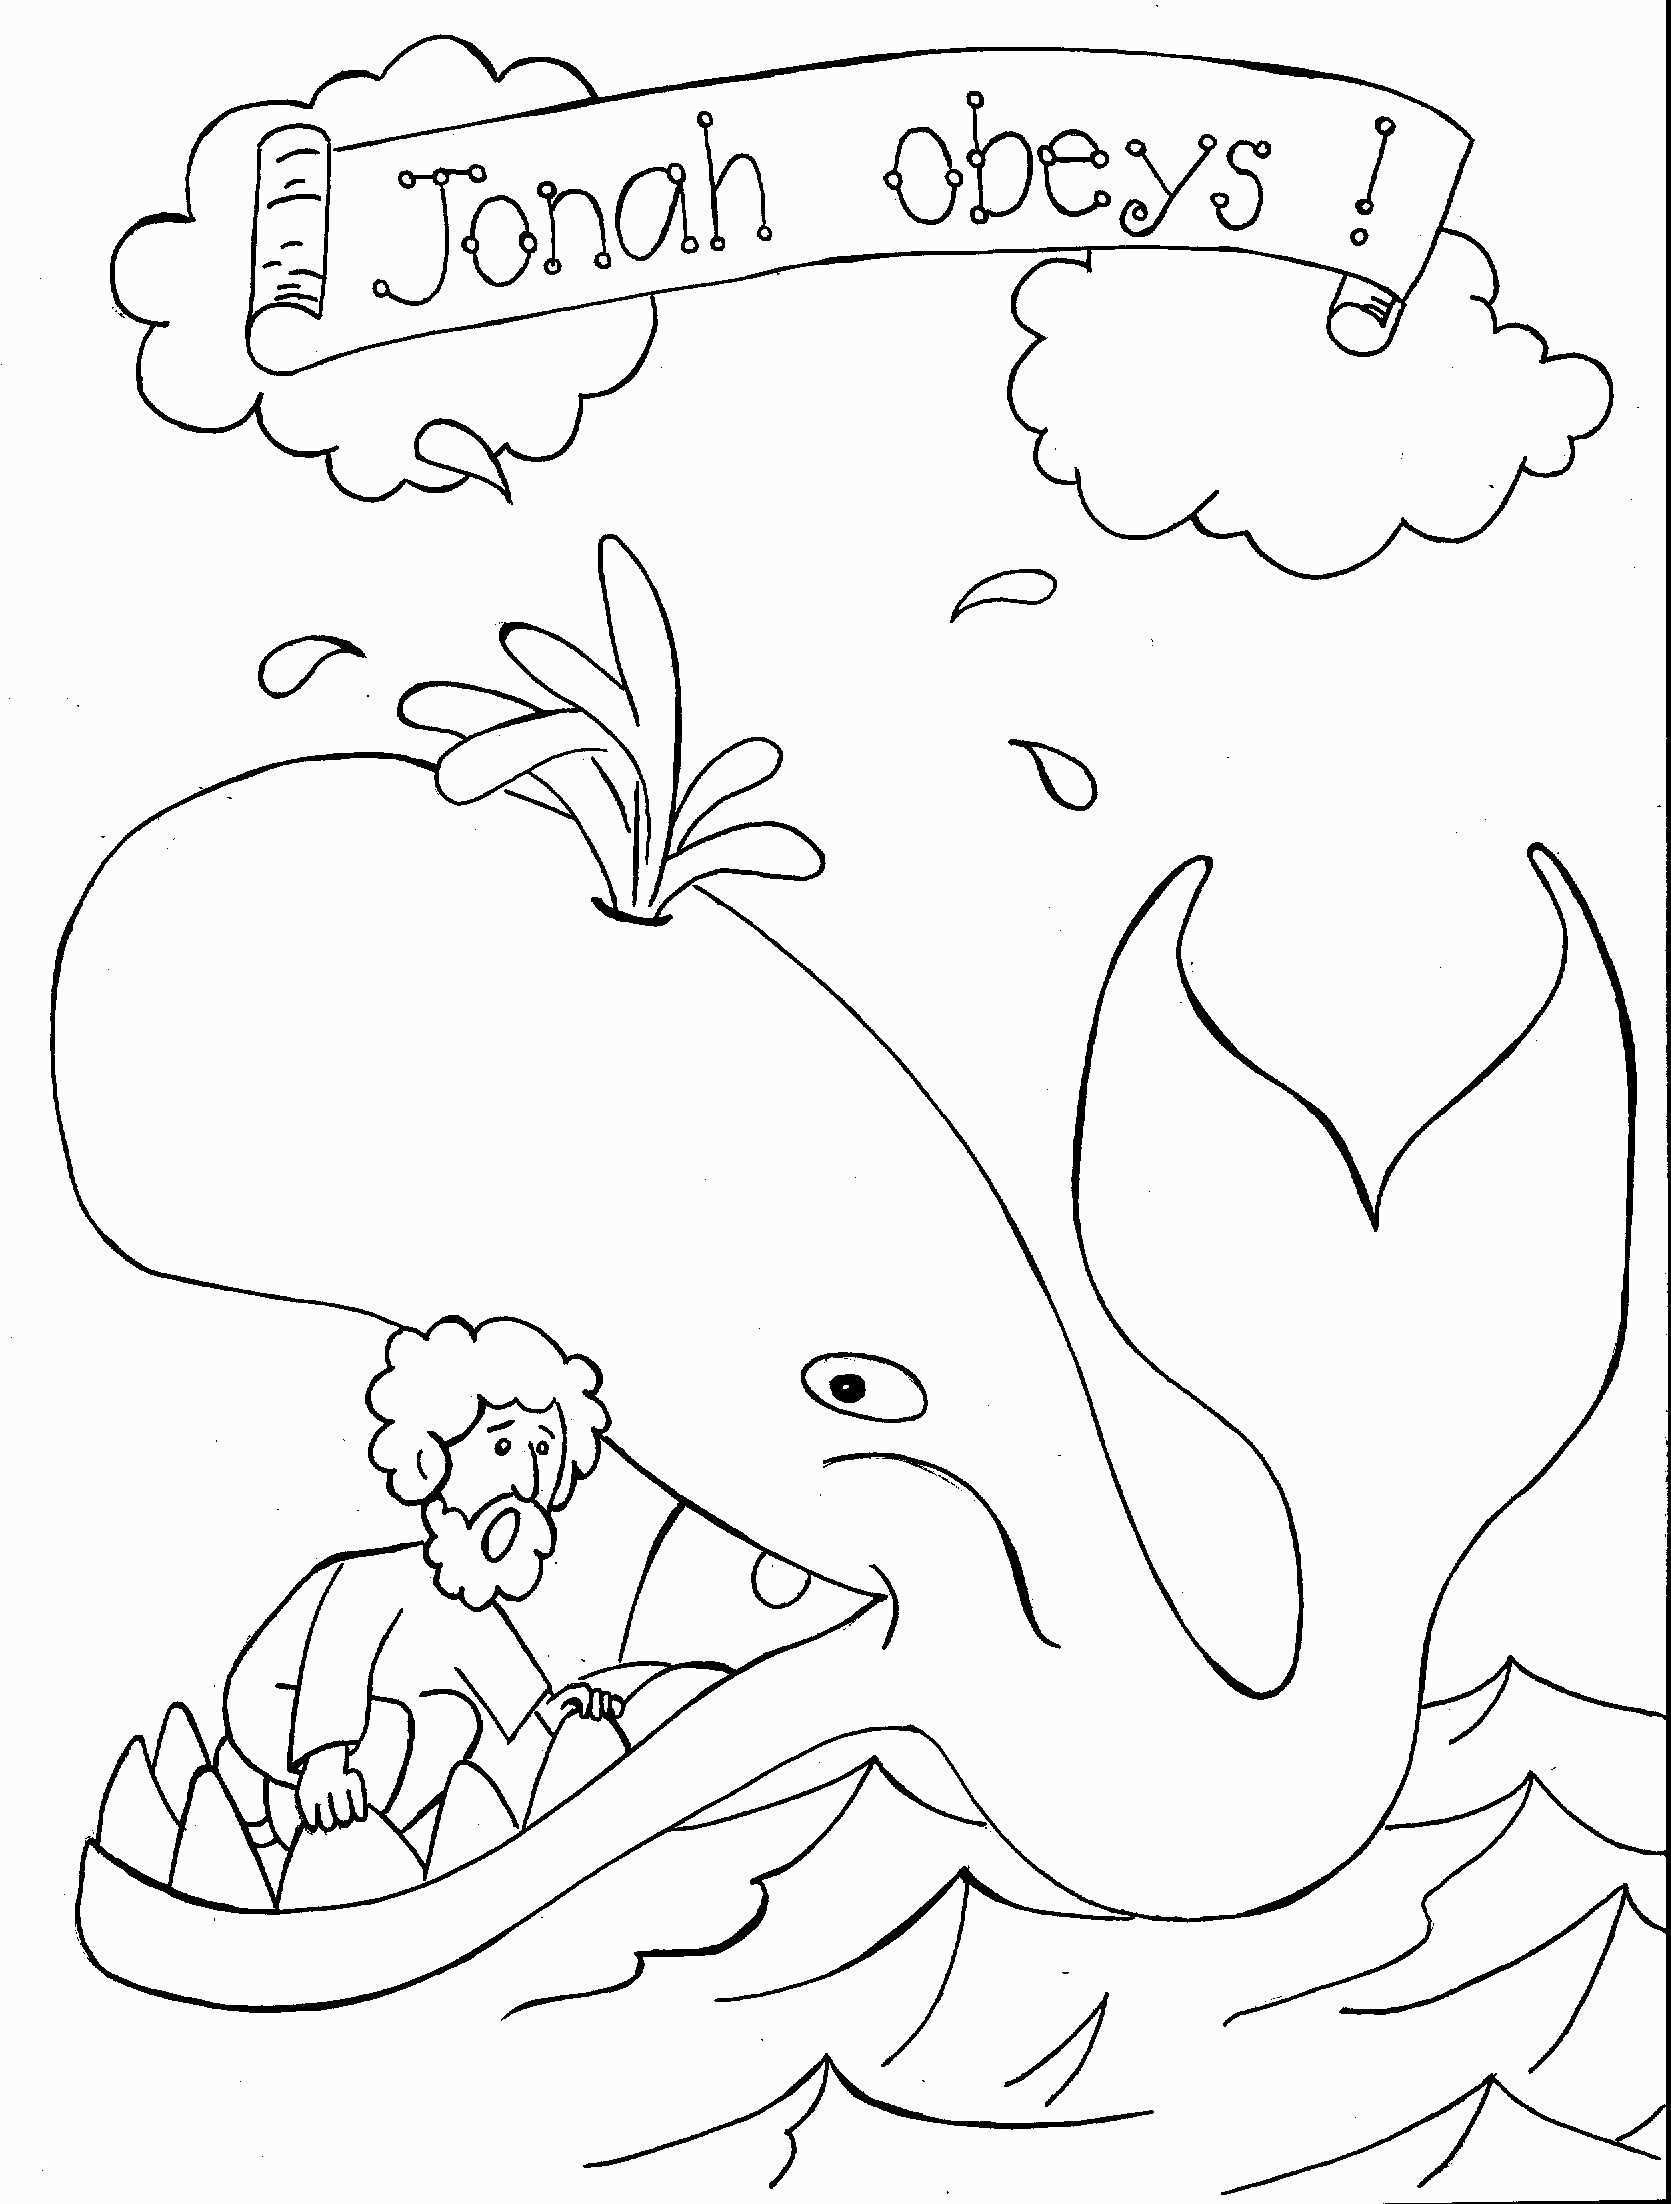 Christian Coloring Pages For Toddlers Coloring Page 44 Amazing Books Of The Bible Coloring Pages Photo